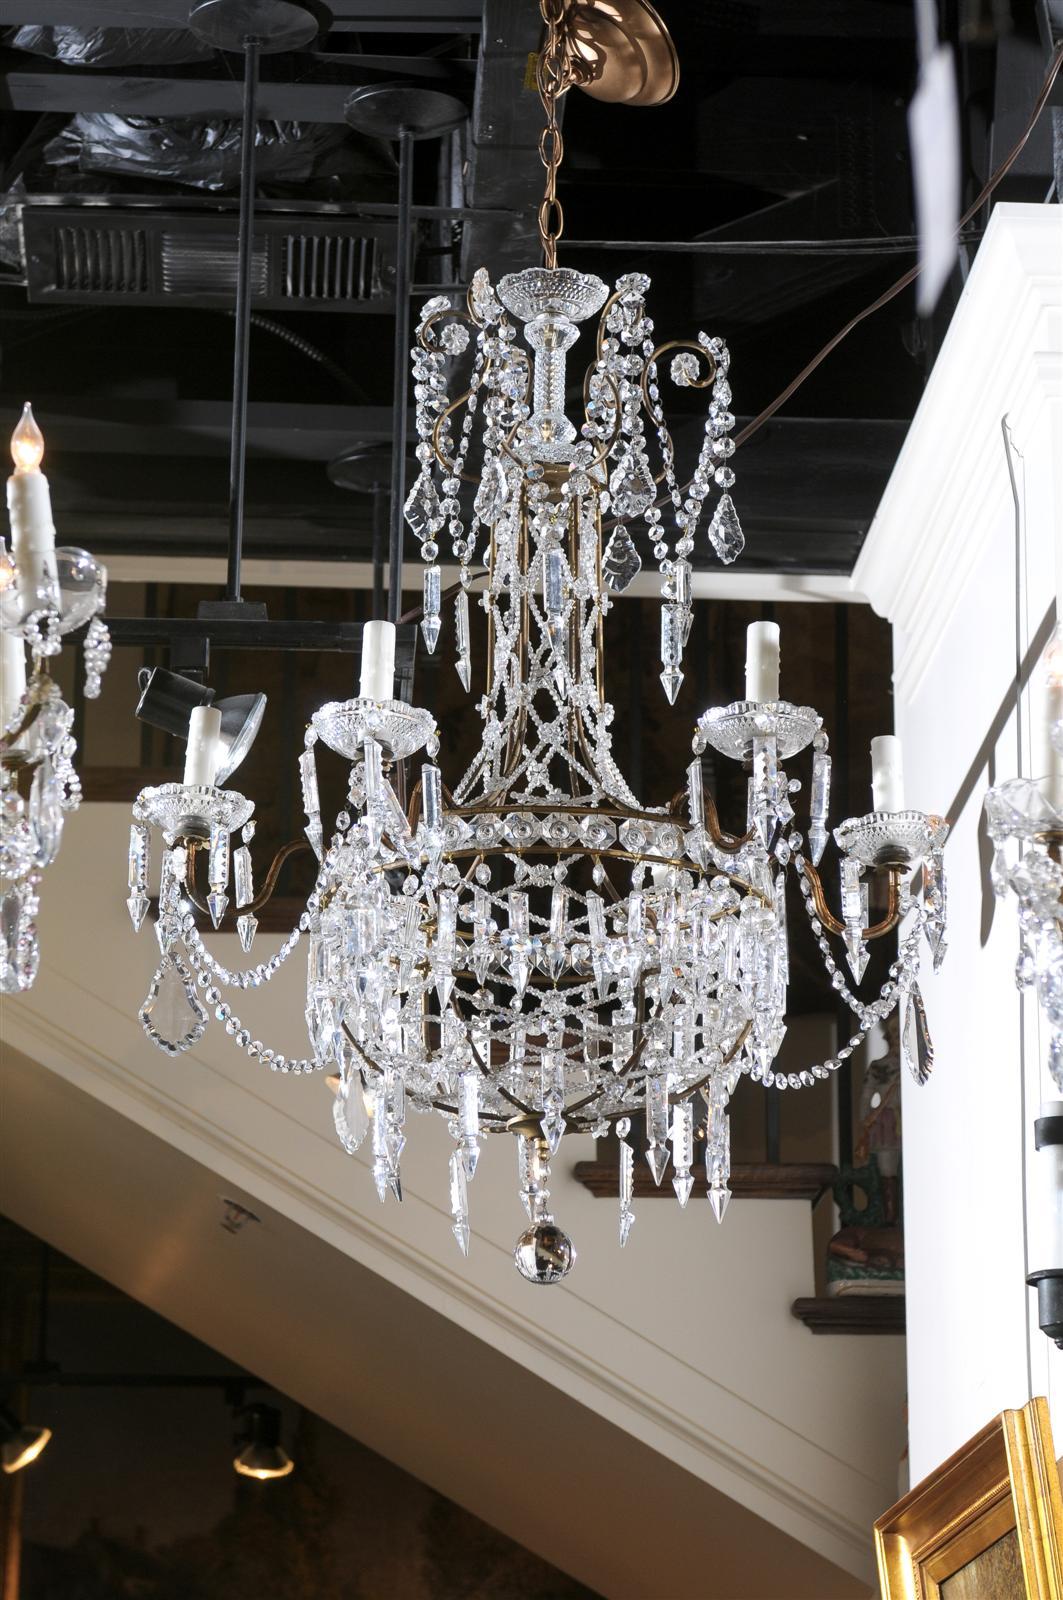 An Italian crystal six-light chandelier from the early 20th century. This exquisite Italian crystal chandelier features a delightful vertical silhouette. A metal armature is the support for the abundant variety of crystals. The elegant vertical